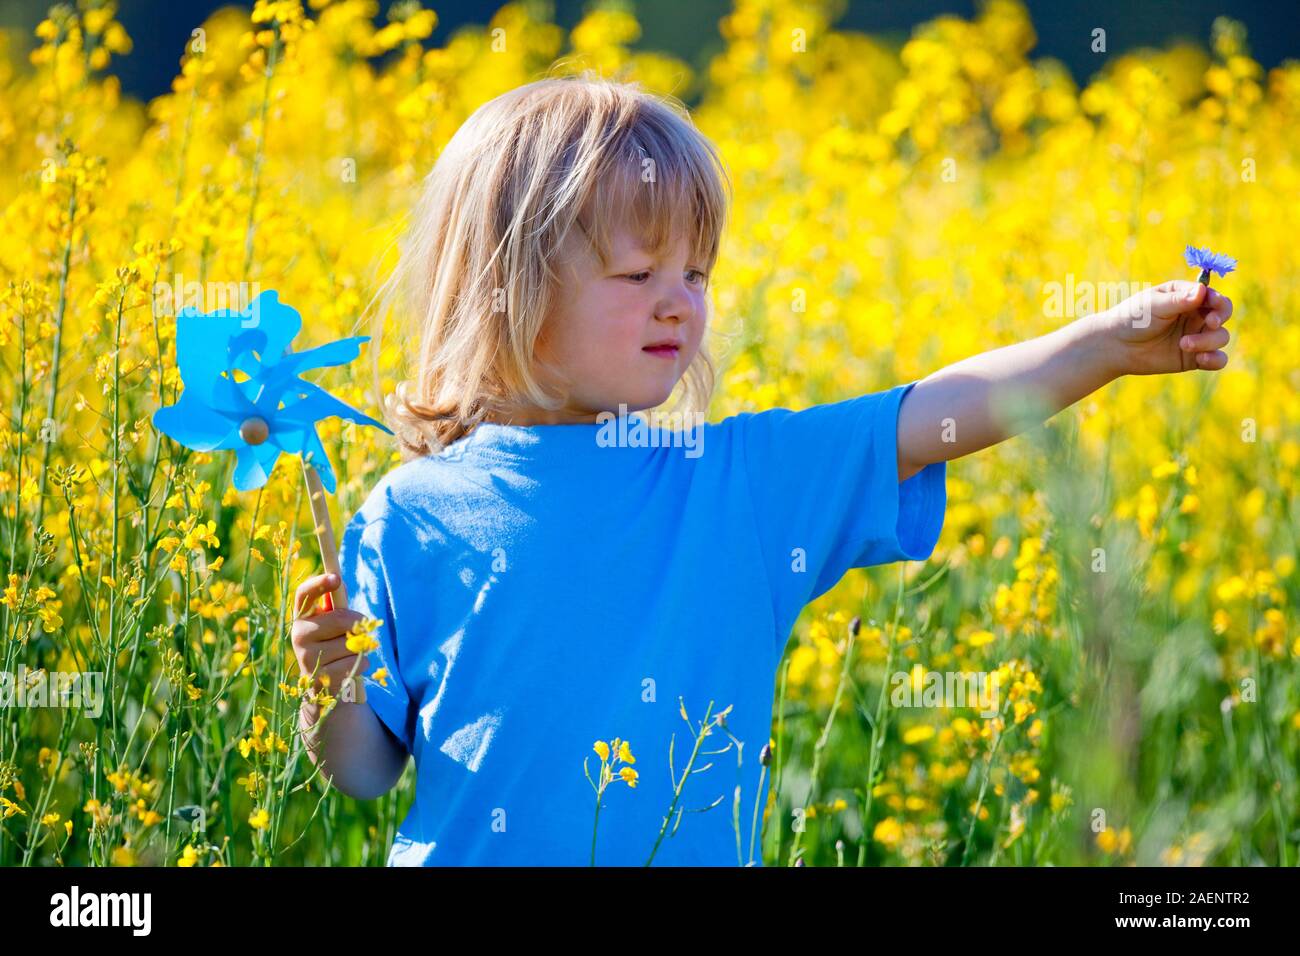 boy with long blond hair holding pinwheel in canola field Stock Photo